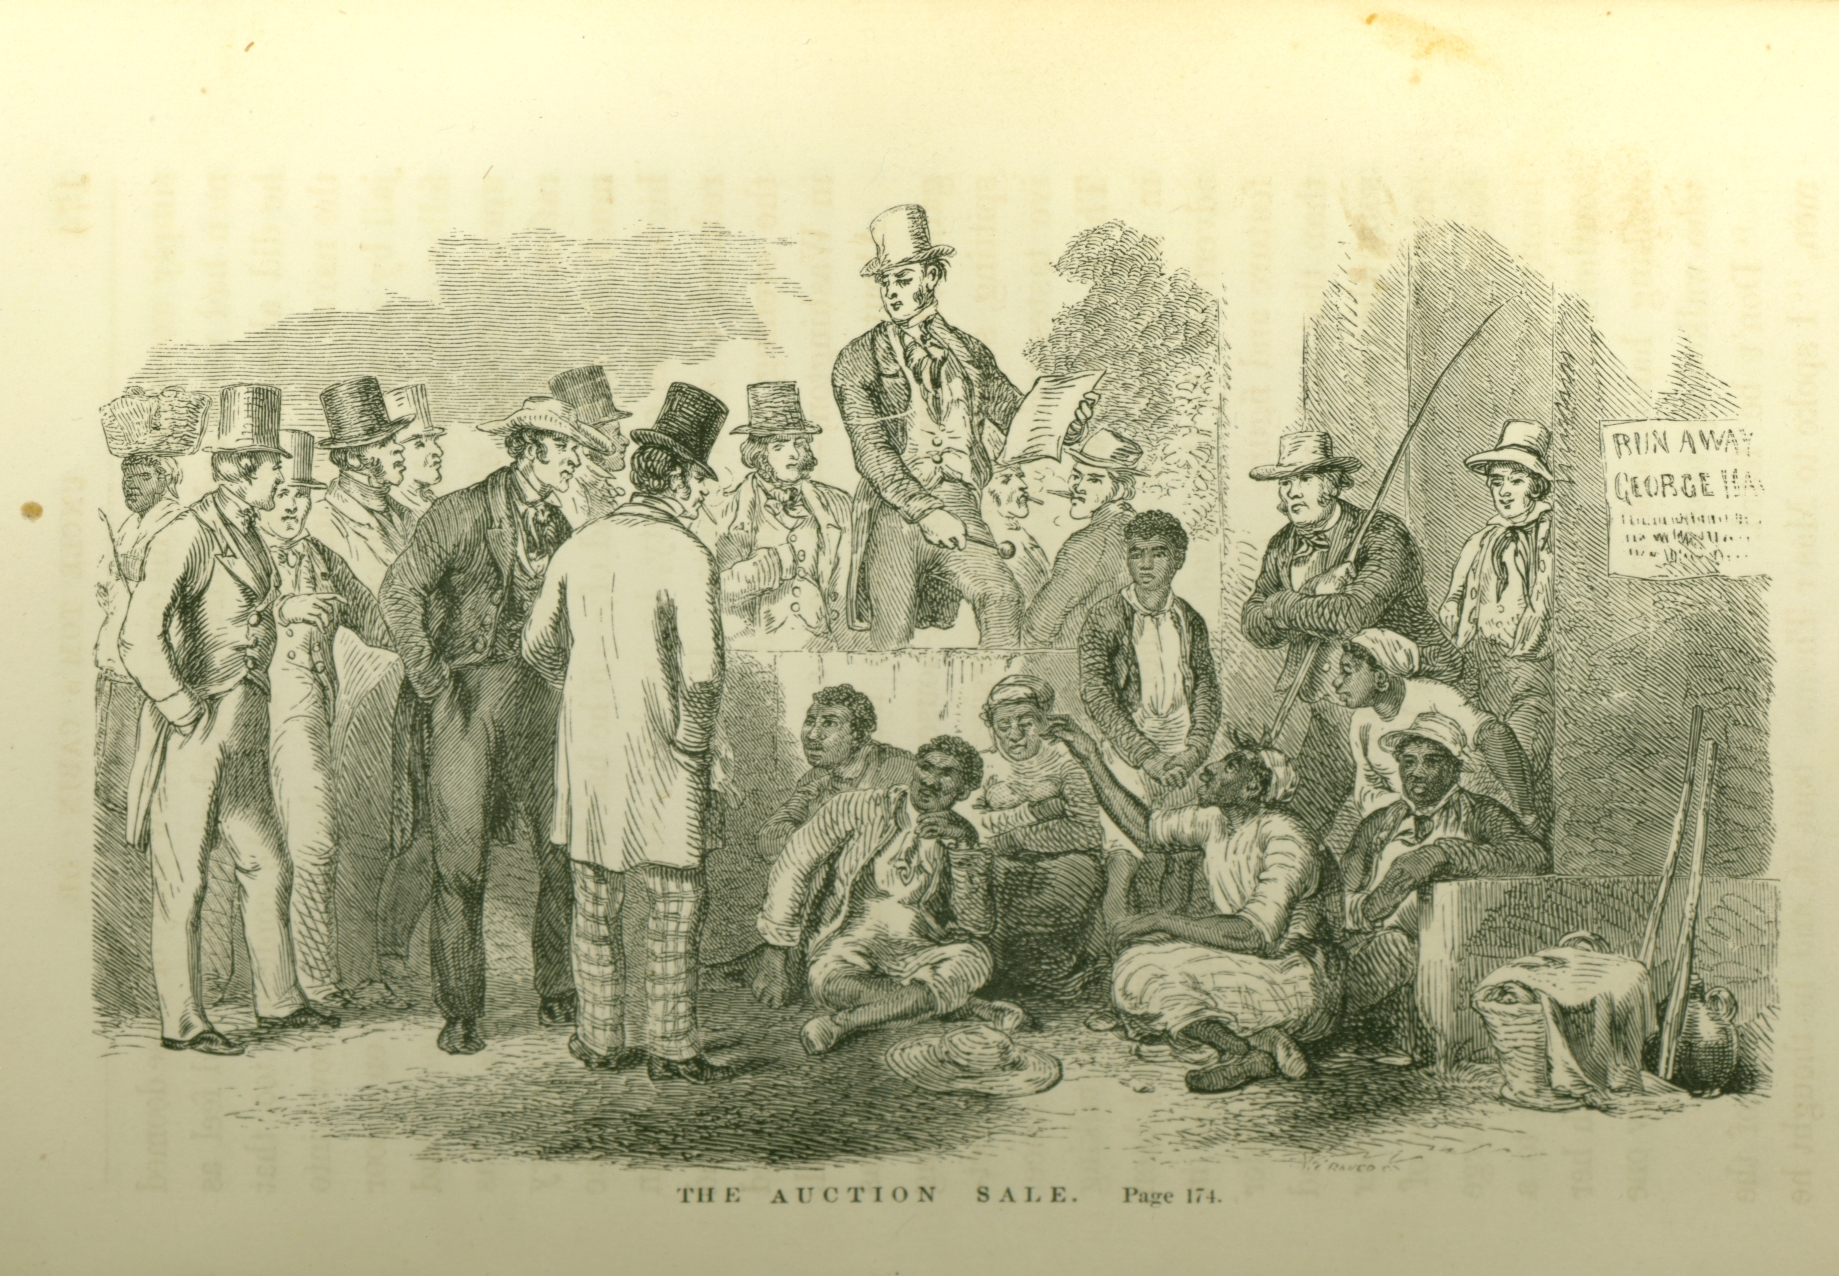 Hammatt Billings, The Auction Sale, 1852, engraving, from Harriet Beecher Stowe. Uncle Tom's Cabin; or, Life Among the Lowly, Boston: John P. Jewett & Company, 1852, p. 174 (Newberry Library)